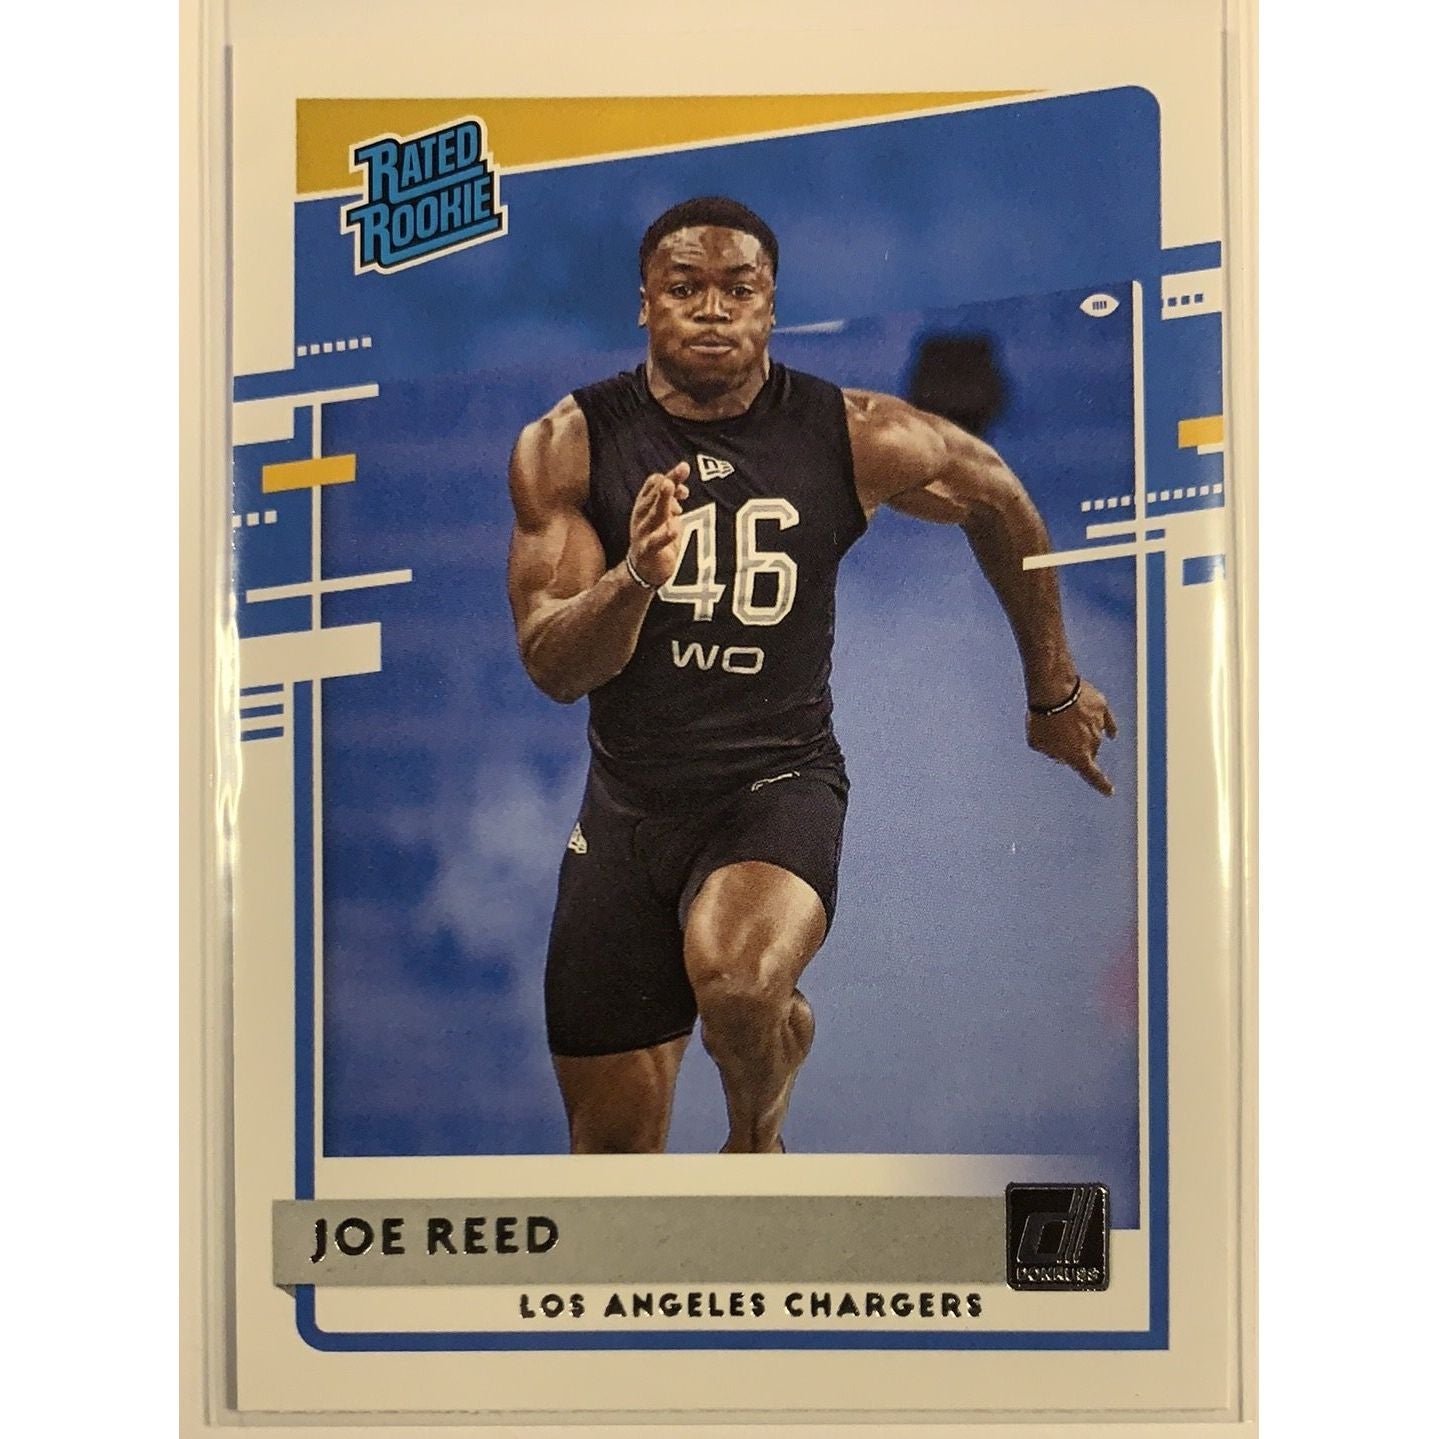  2020 Donruss Joe Reed Rated Rookie  Local Legends Cards & Collectibles